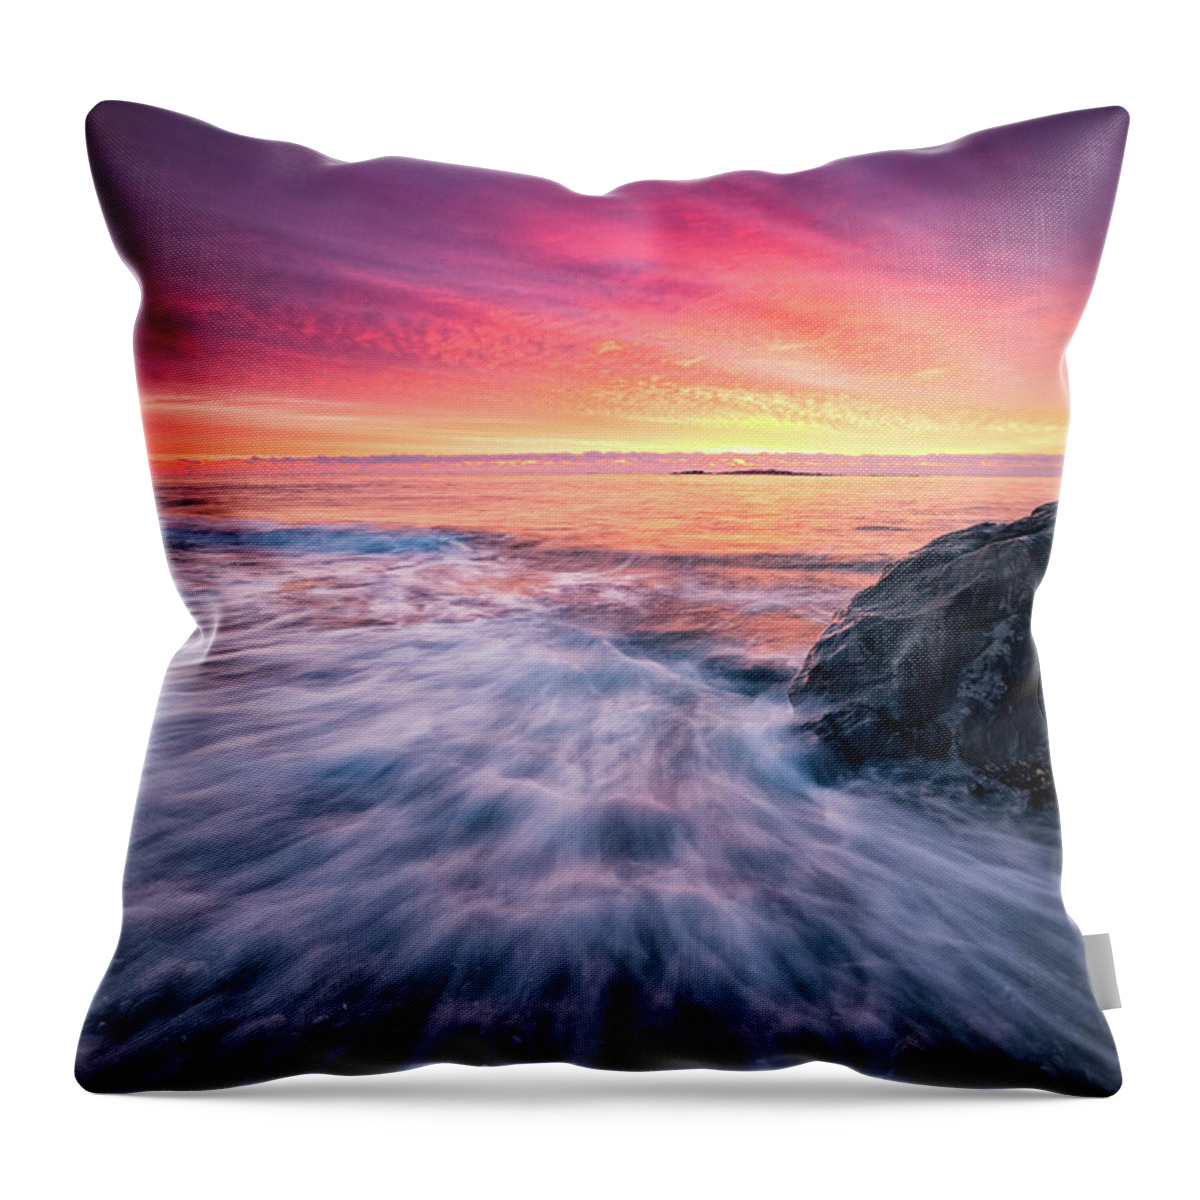 Sunrise Throw Pillow featuring the photograph In The Beginning There Was Light by Jeff Sinon